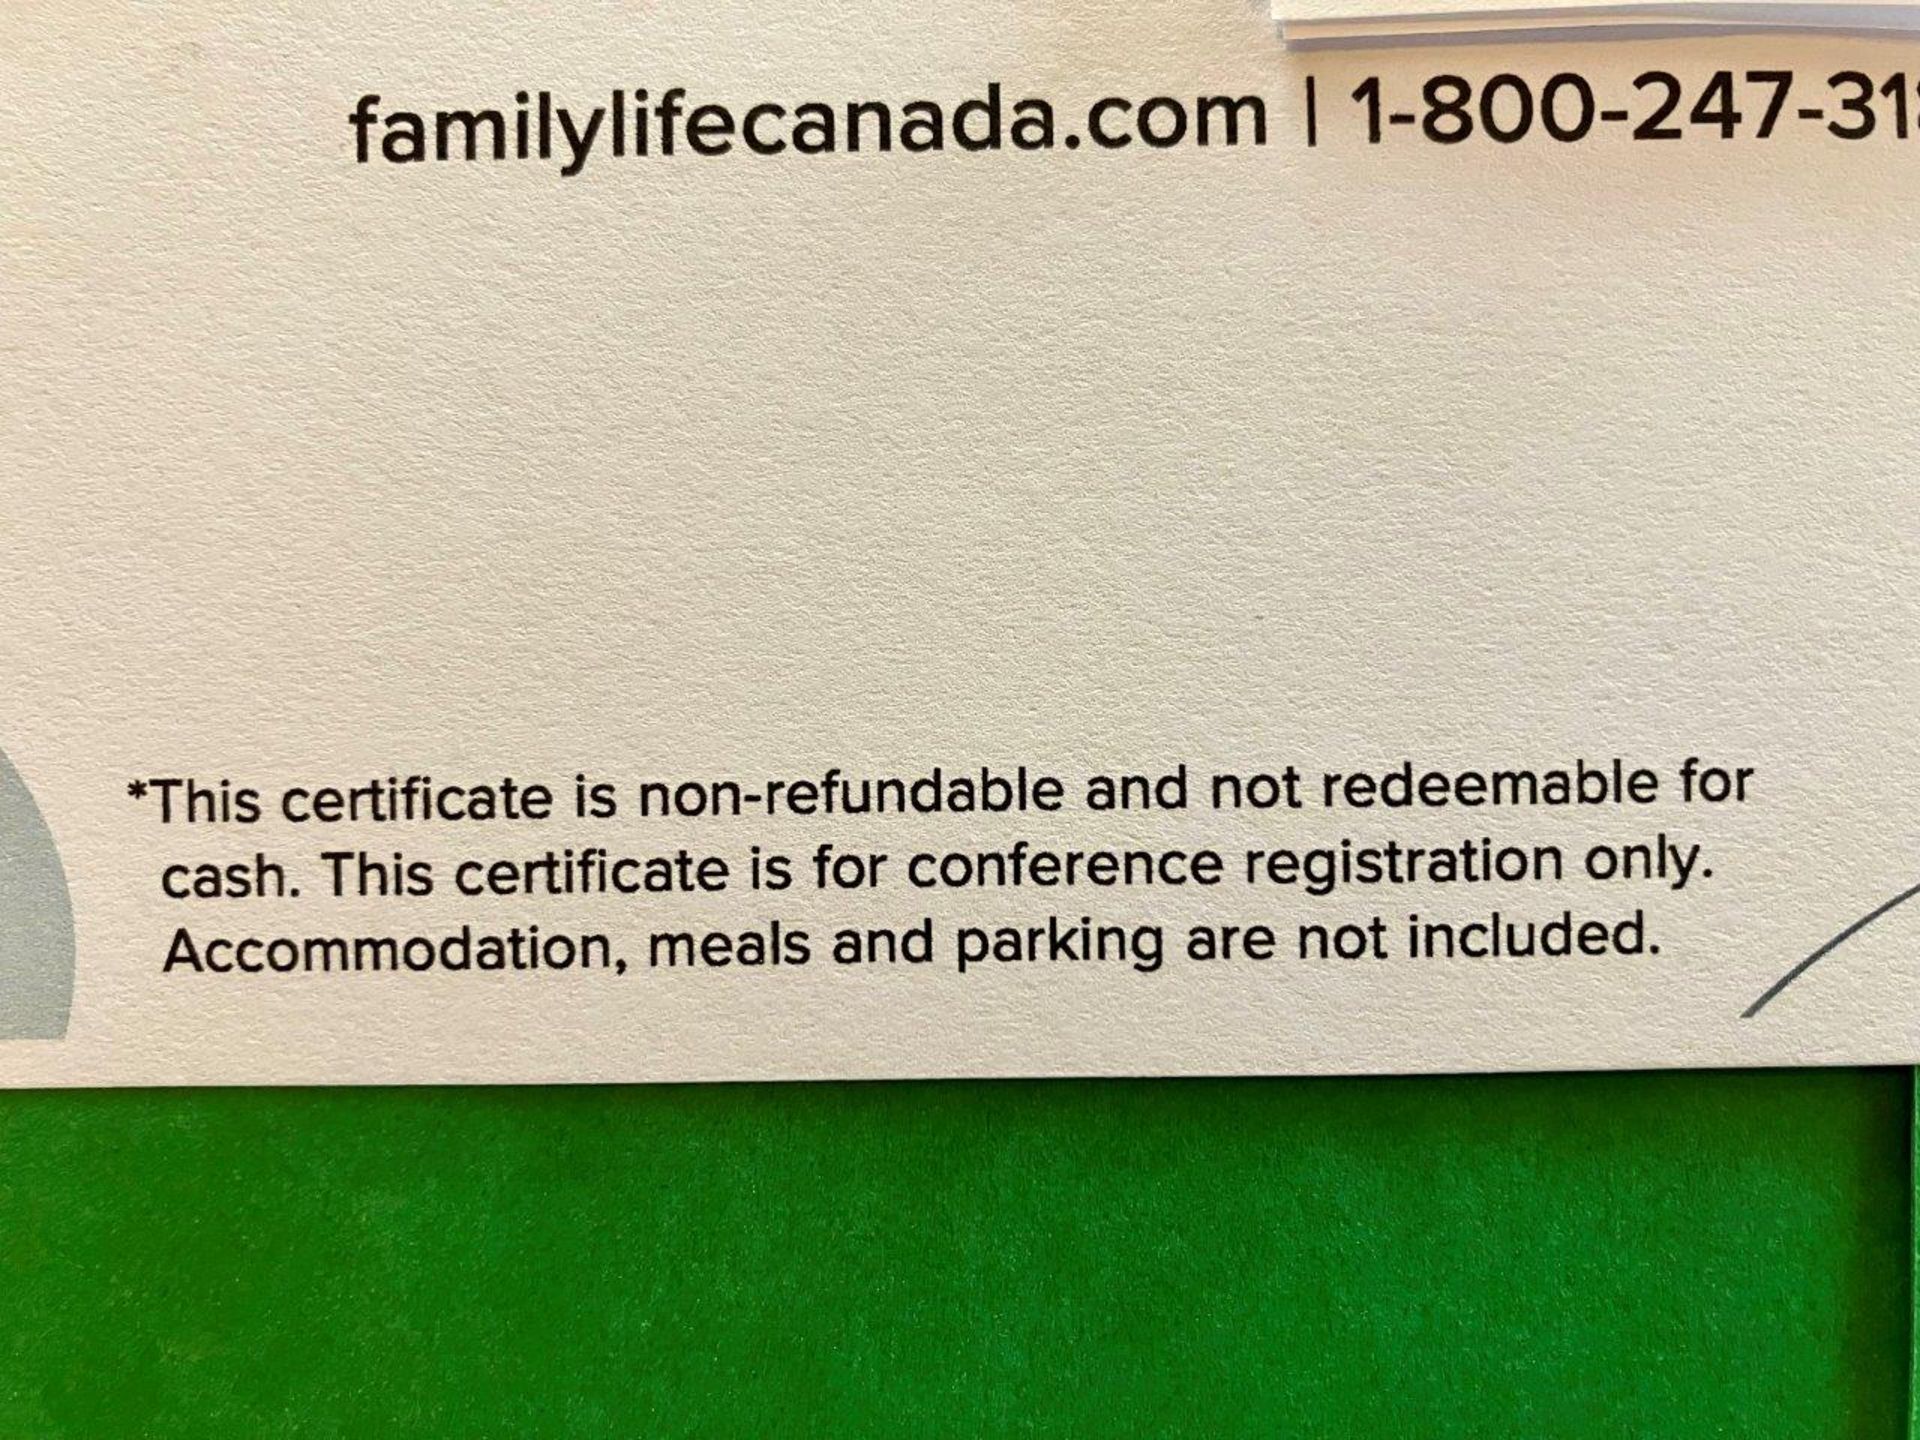 FAMILY LIFE CANADA COUPLES WEEKEND GETAWAY GIFT CERTFICATE - Image 3 of 3